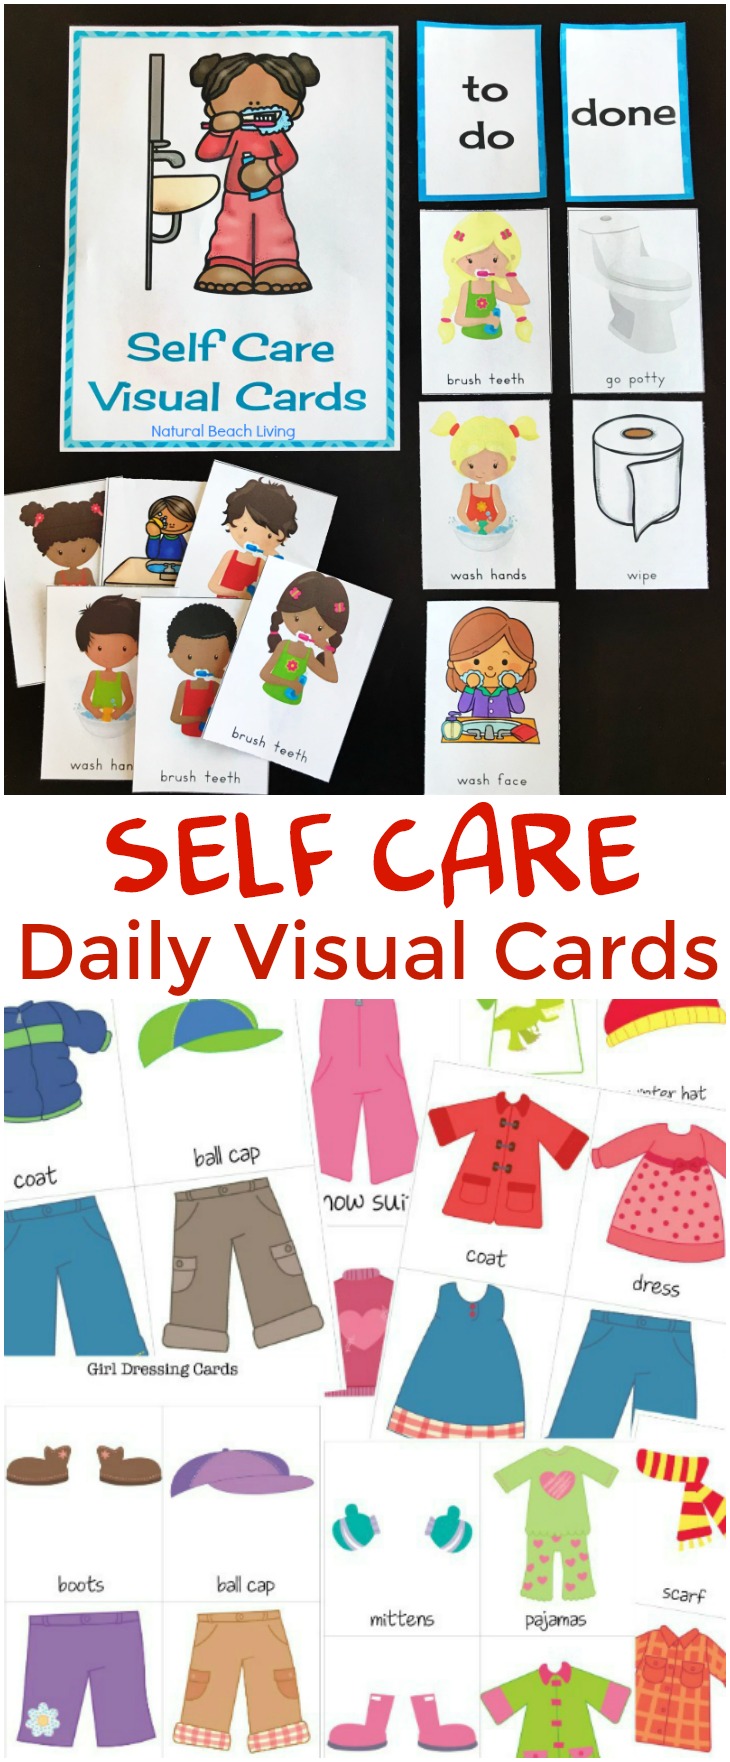 Self Care Routine Daily Visual Cards, HELP YOUR CHILD GAIN CONFIDENCE AND INDEPENDENCE WITH SELF CARE ROUTINE VISUAL CARDS, Daily Visual Schedule, Routine Visual Schedule, Bathroom Visual Cards, Autism, Dressing Cards and Labels, Picture Cards for Kids